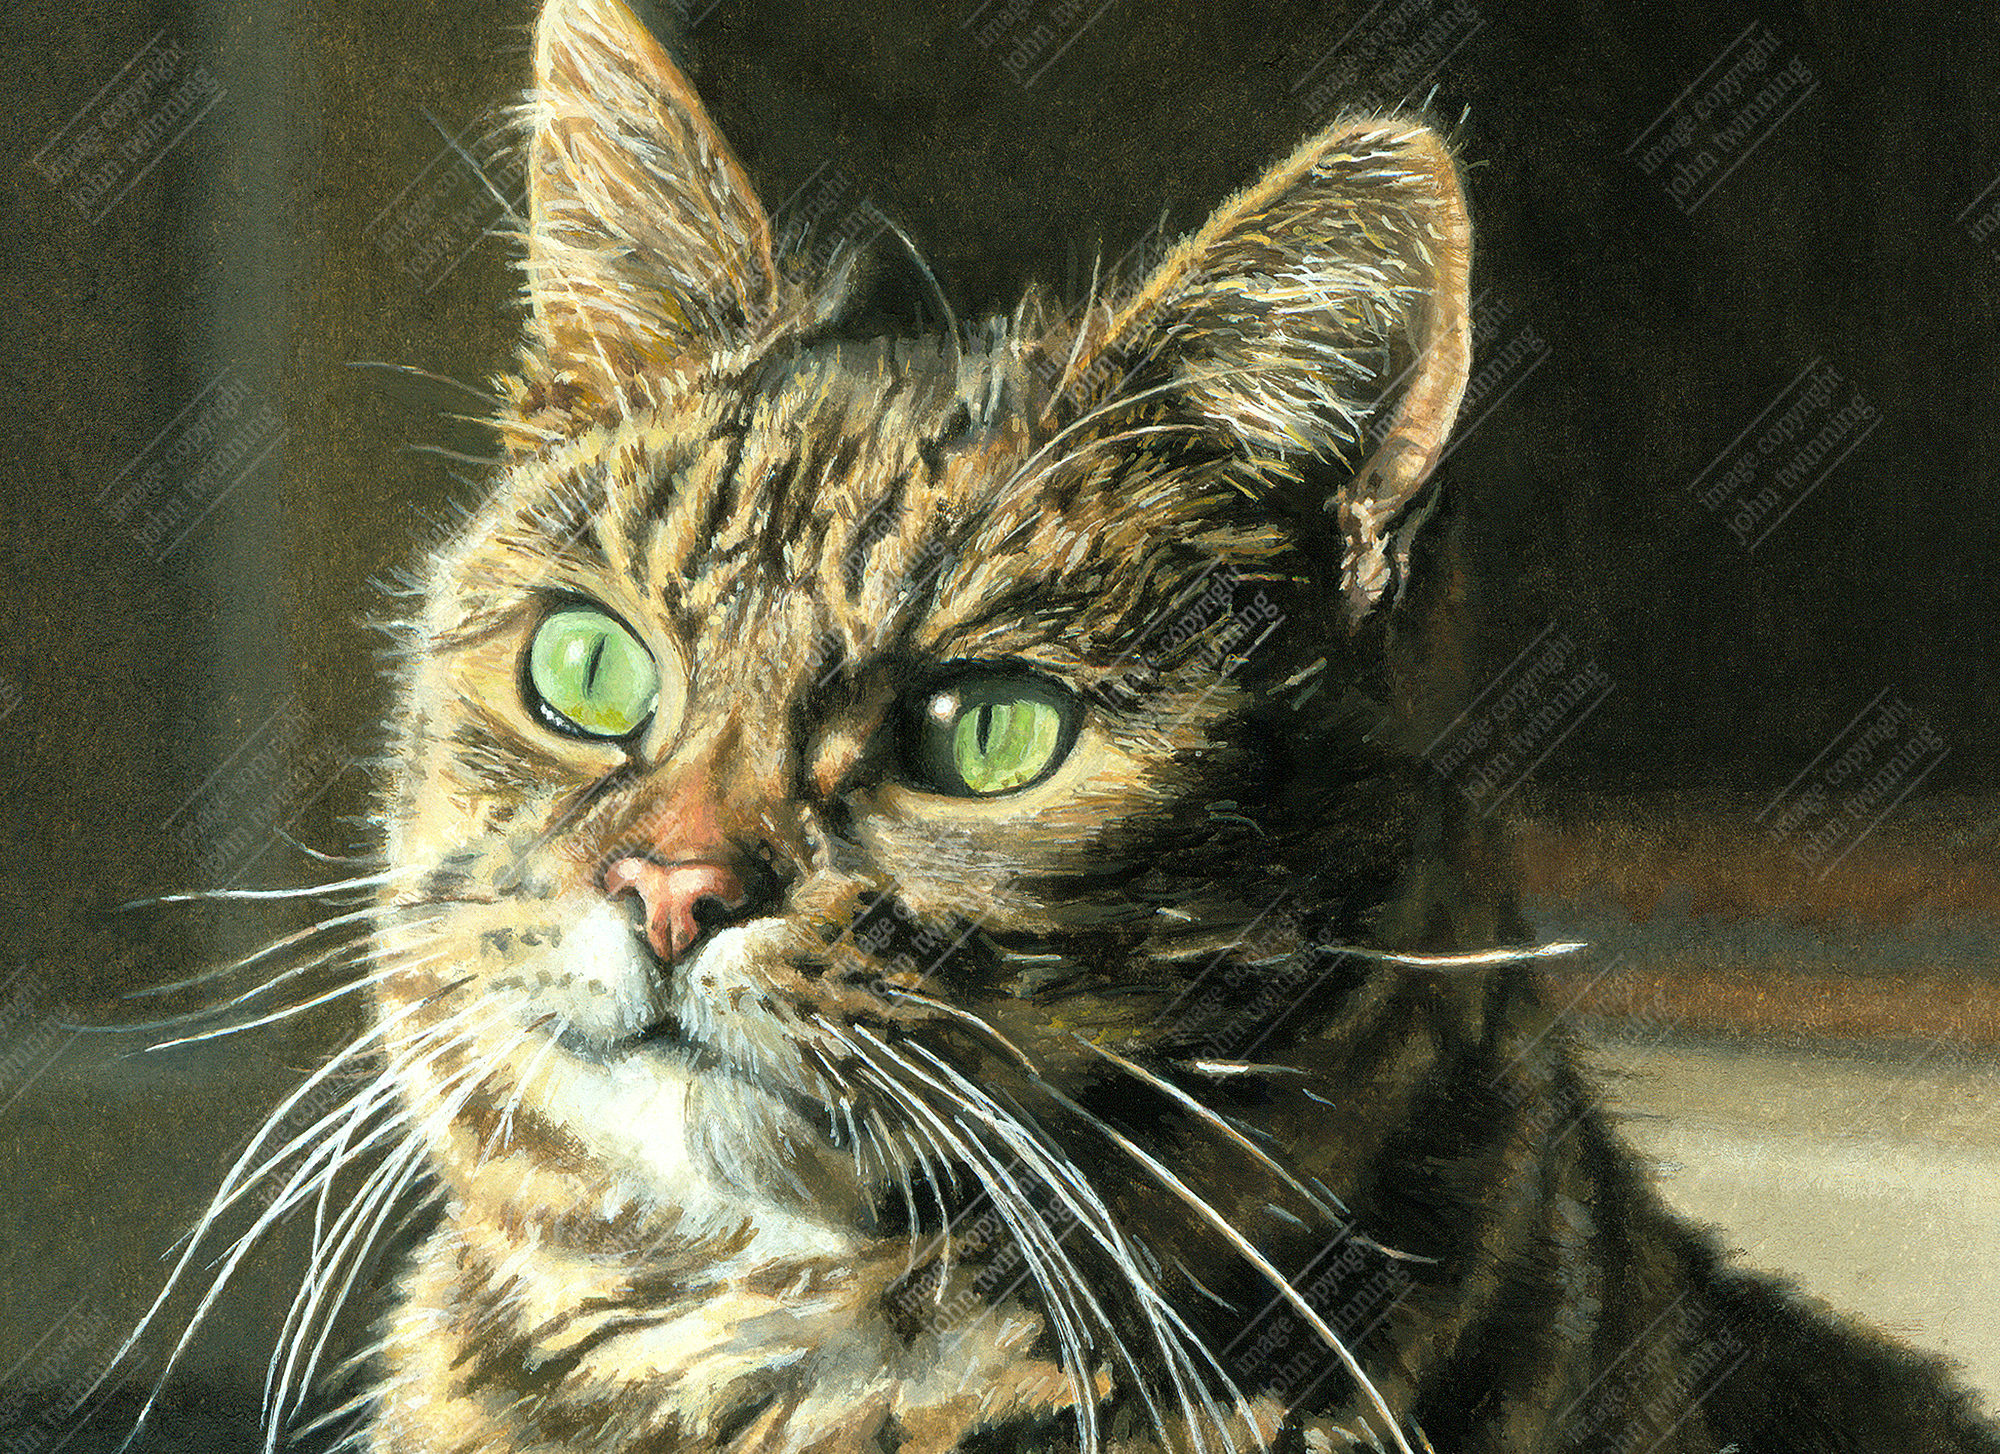 'Tabatha Study III' [detail] - art print from a pet portrait painting of a tabby cat